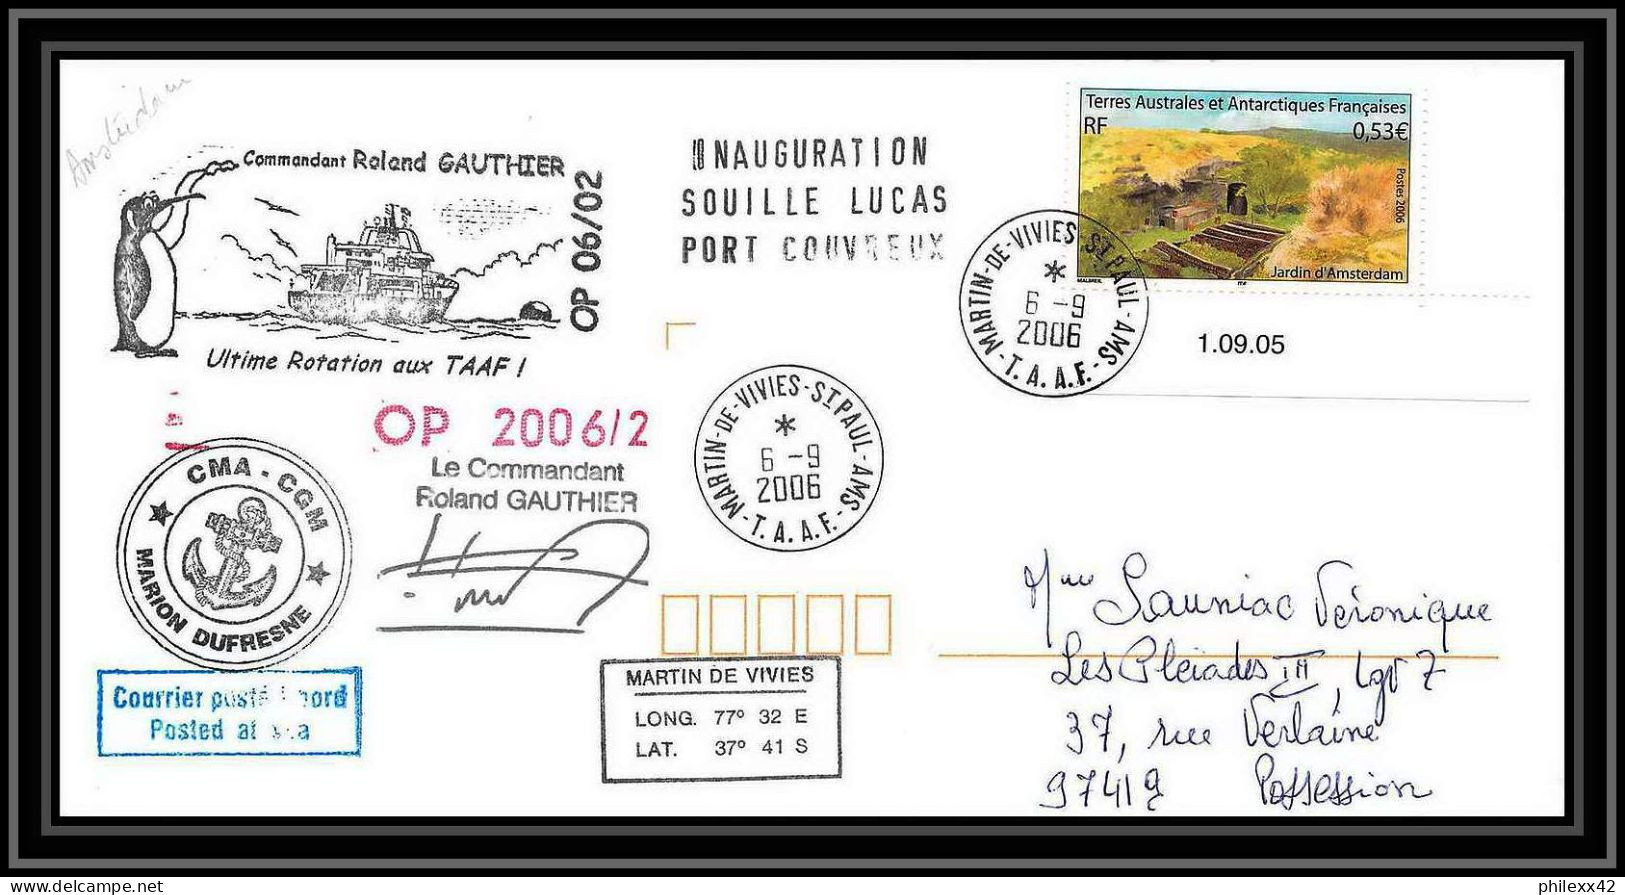 2600 ANTARCTIC Terres Australes TAAF Lettre Cover Dufresne 2 Signé Signed Op 2006/2 N°438 6/9/2006 Coin Daté - Antarctic Expeditions